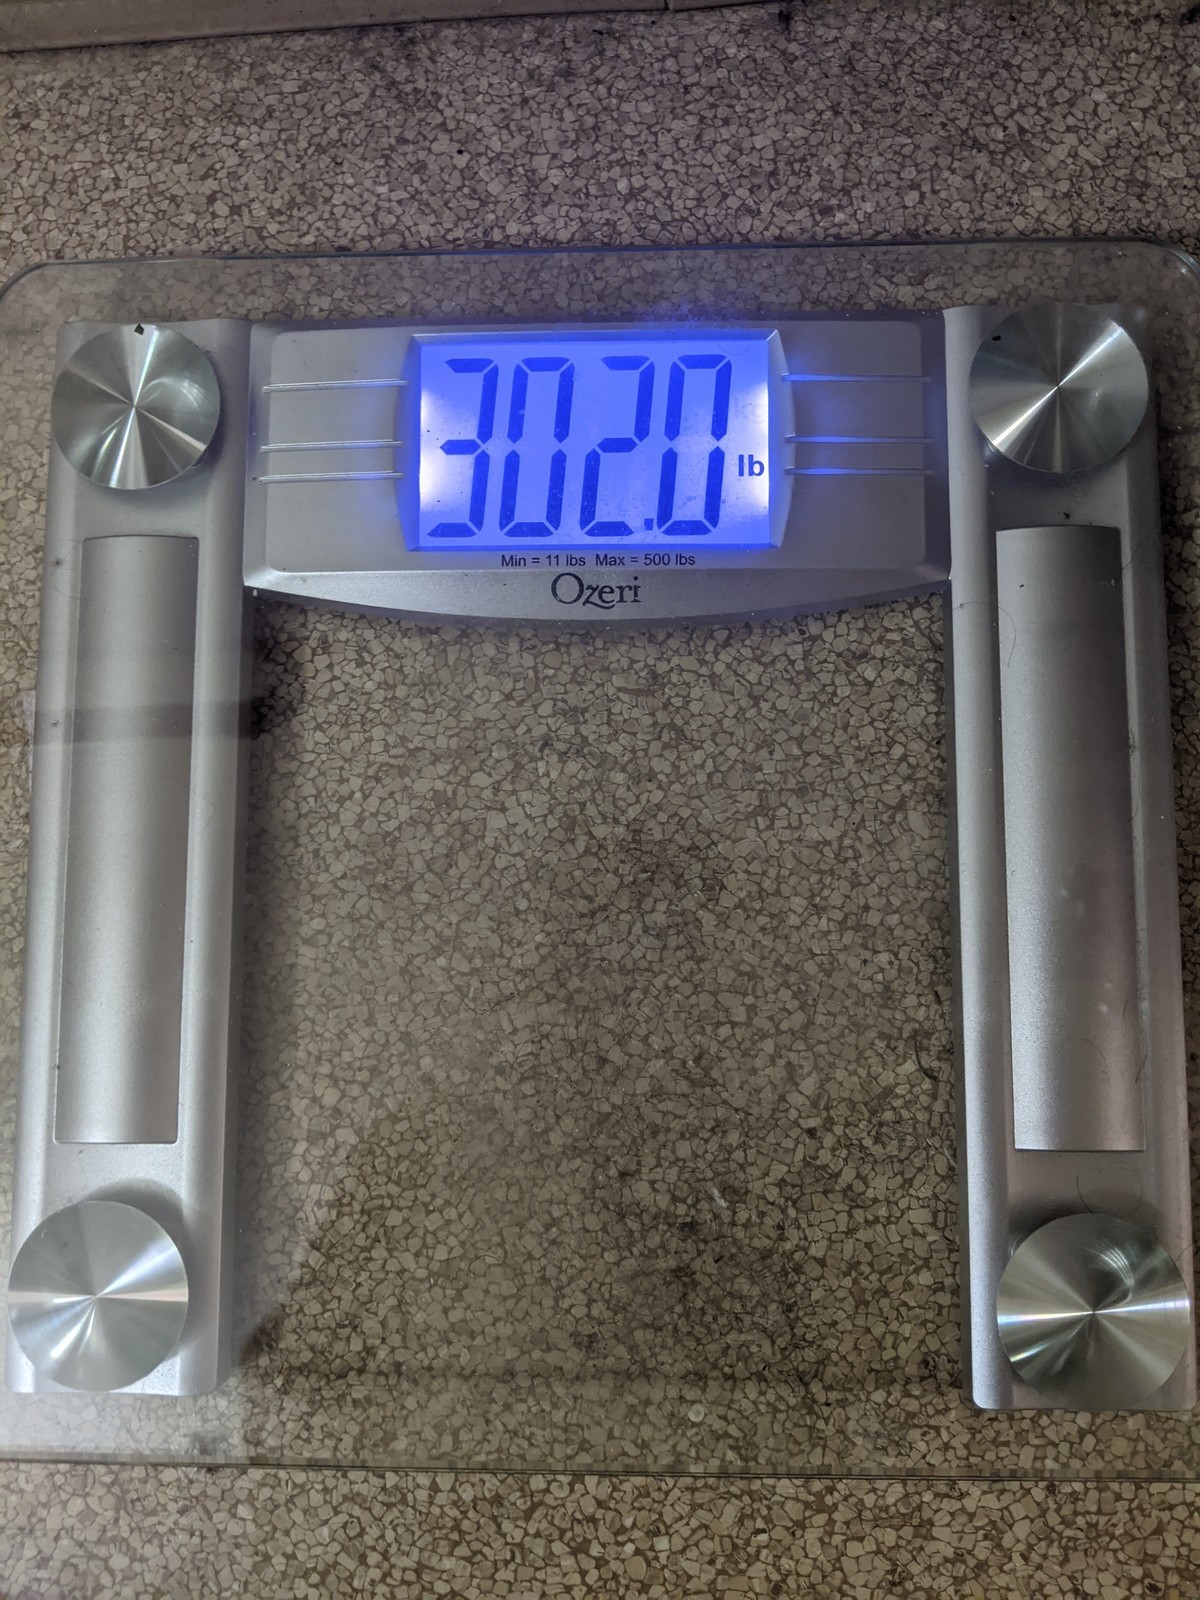 Oct 2020 weight log. join list: WeightlossProgress (169 subs)Mention History So it seems I will probably either be at 300 or just below 300 for my next weight l